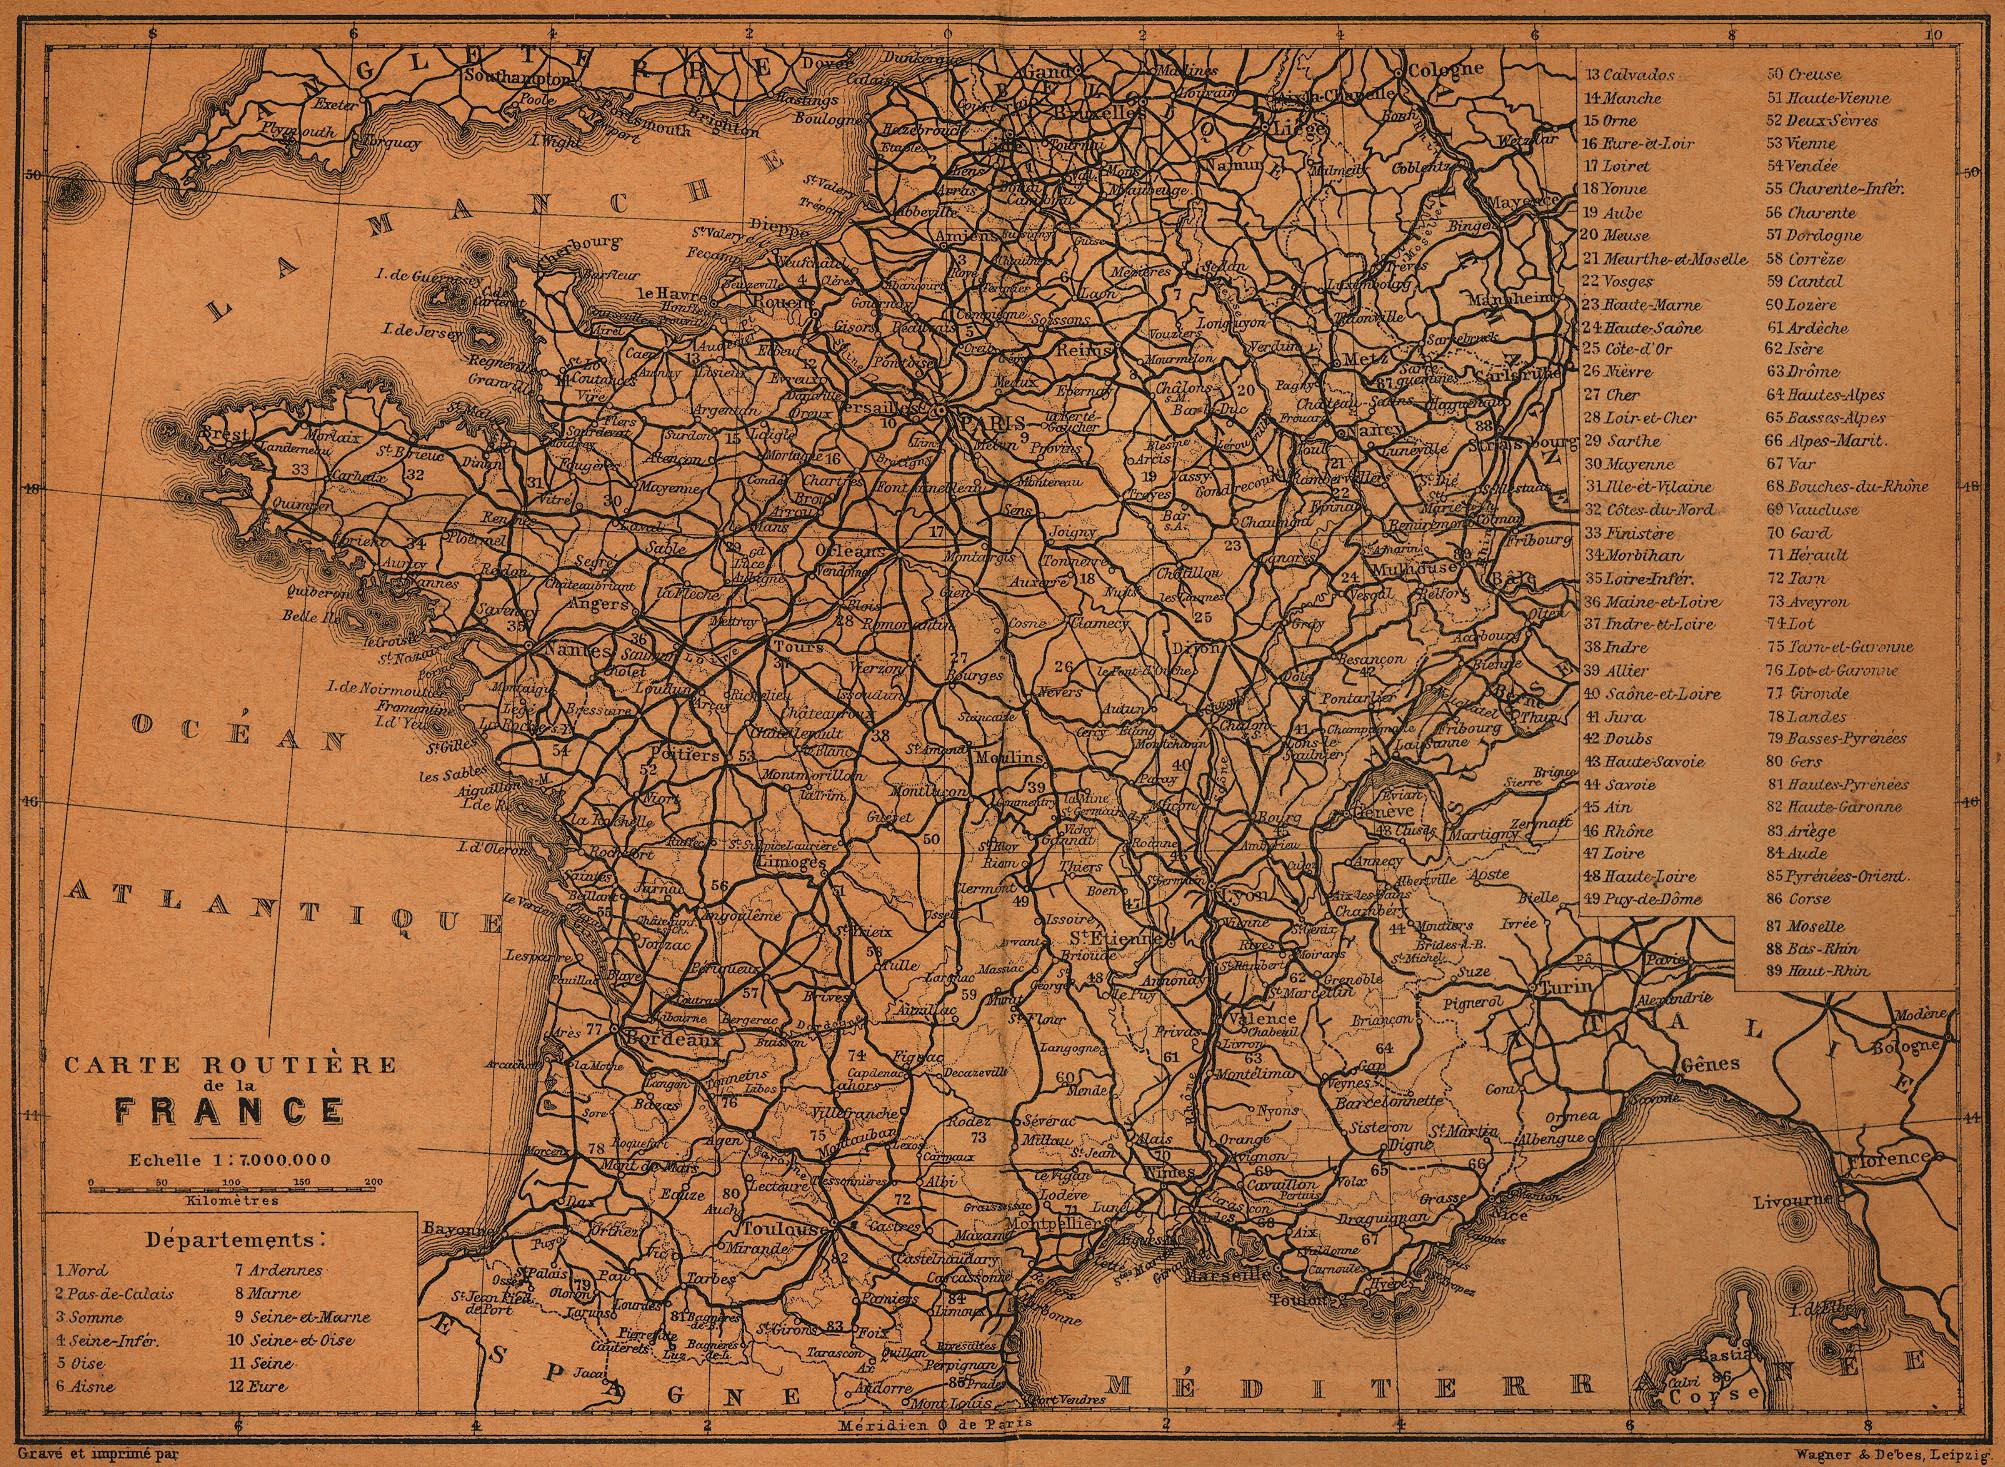 1914 Map of France